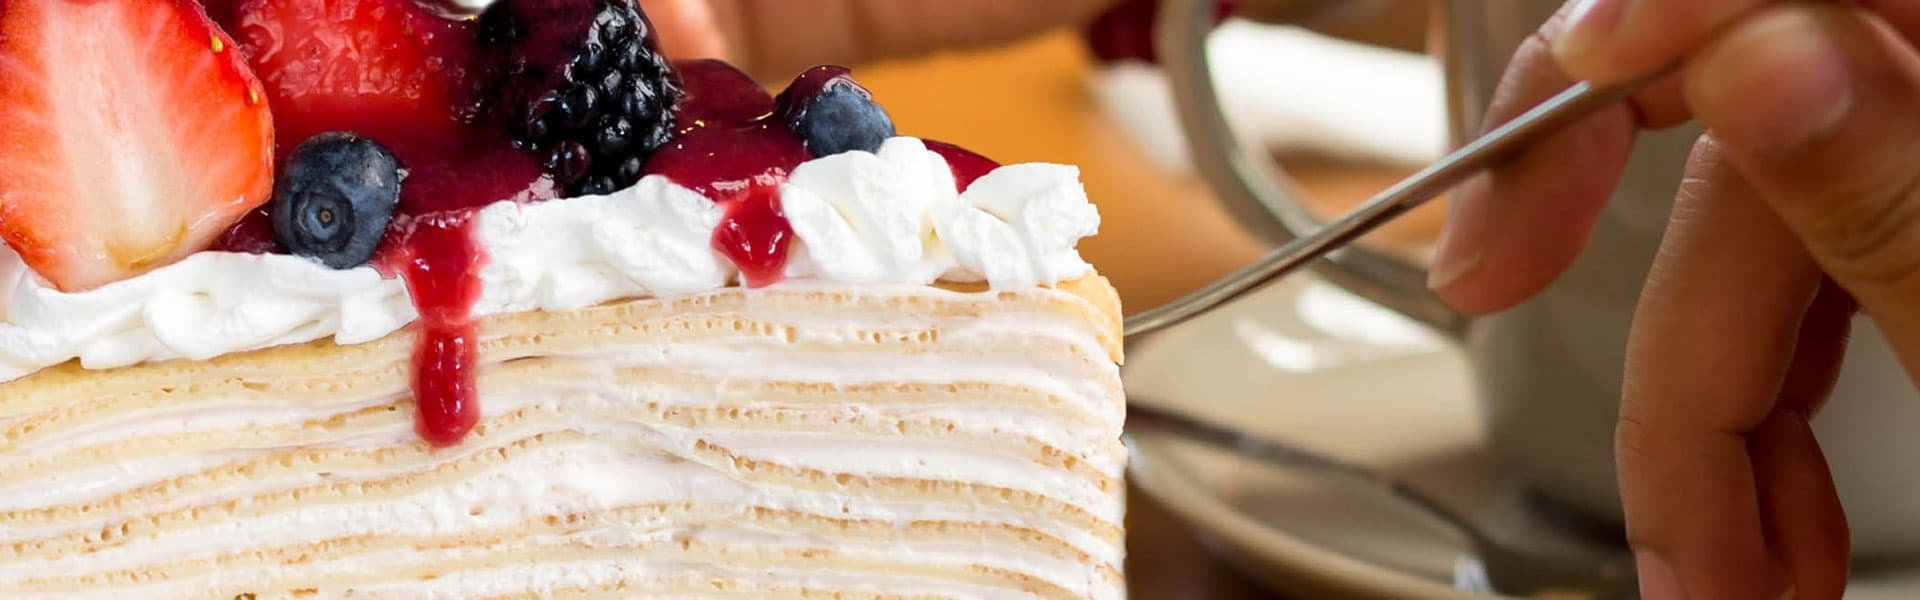 Layered cake with with fruit